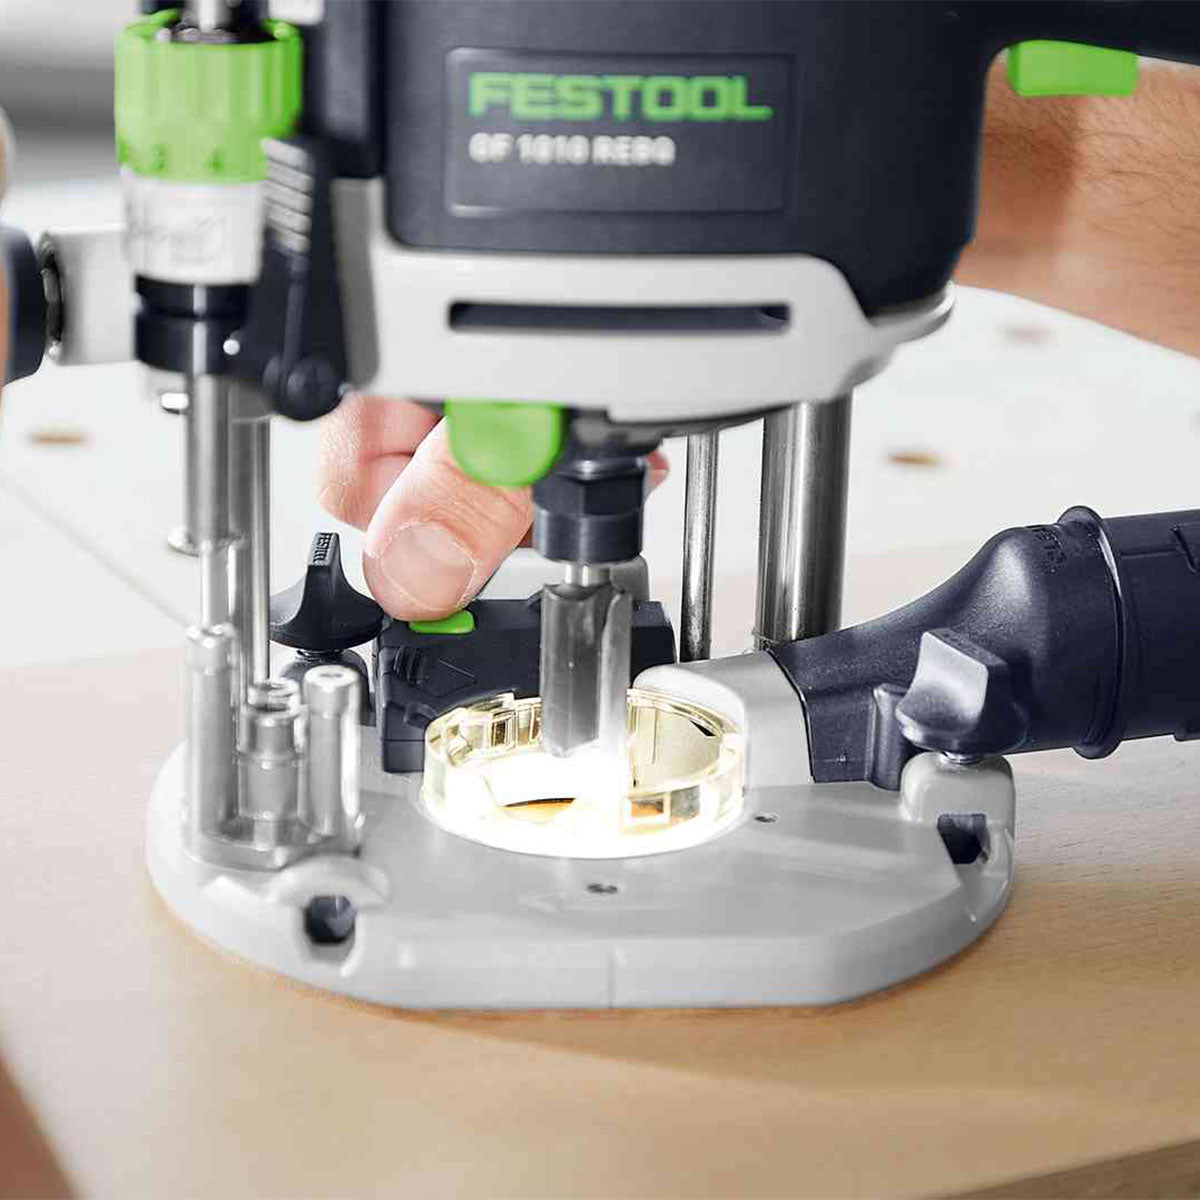 Festool OF 1010 REQ-Plus 110V GB Router Cutter - 578018 With ZS-OF 1010 M Router Accessories Set